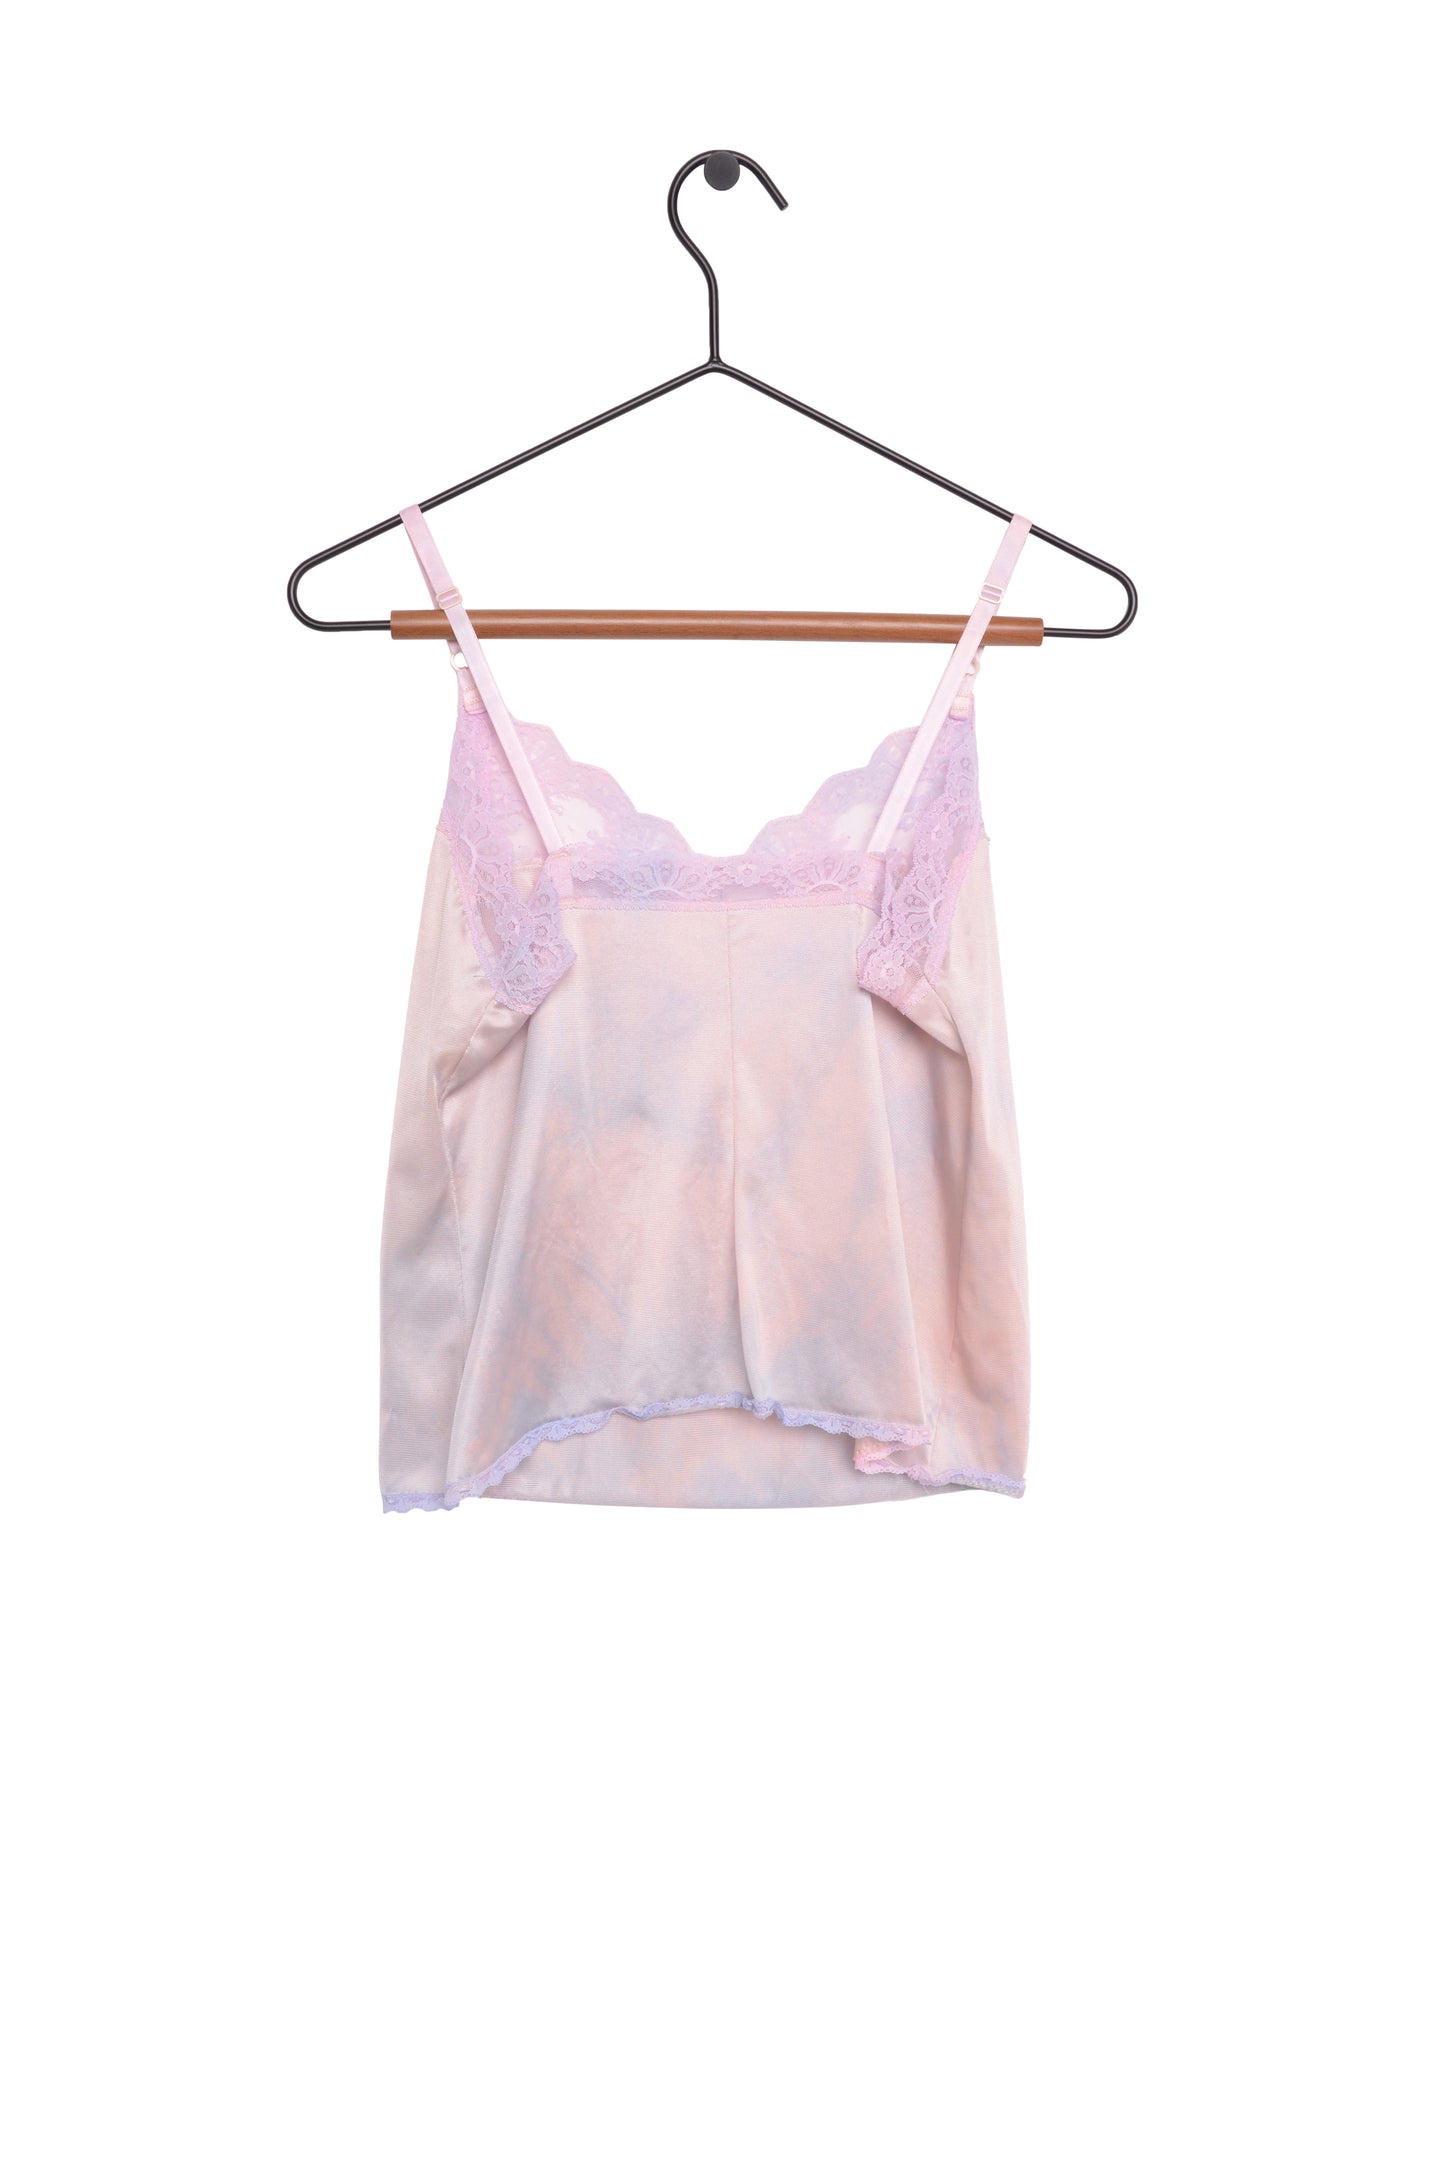 1950s Hand-Dyed Slip Top